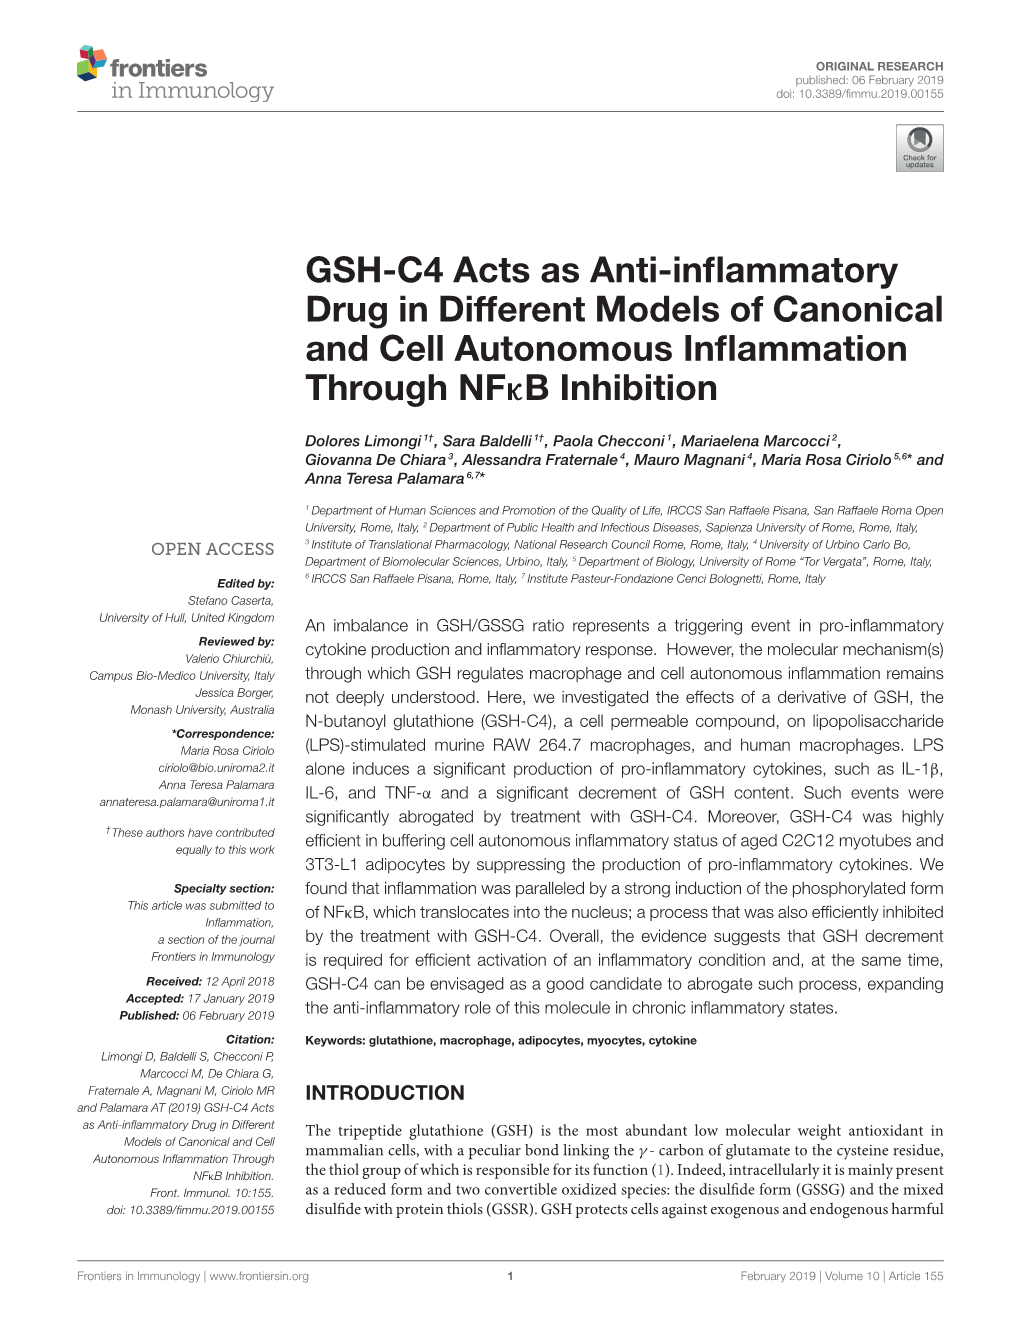 GSH-C4 Acts As Anti-Inflammatory Drug in Different Models of Canonical and Cell Autonomous Inflammation Through Nfκb Inhibition